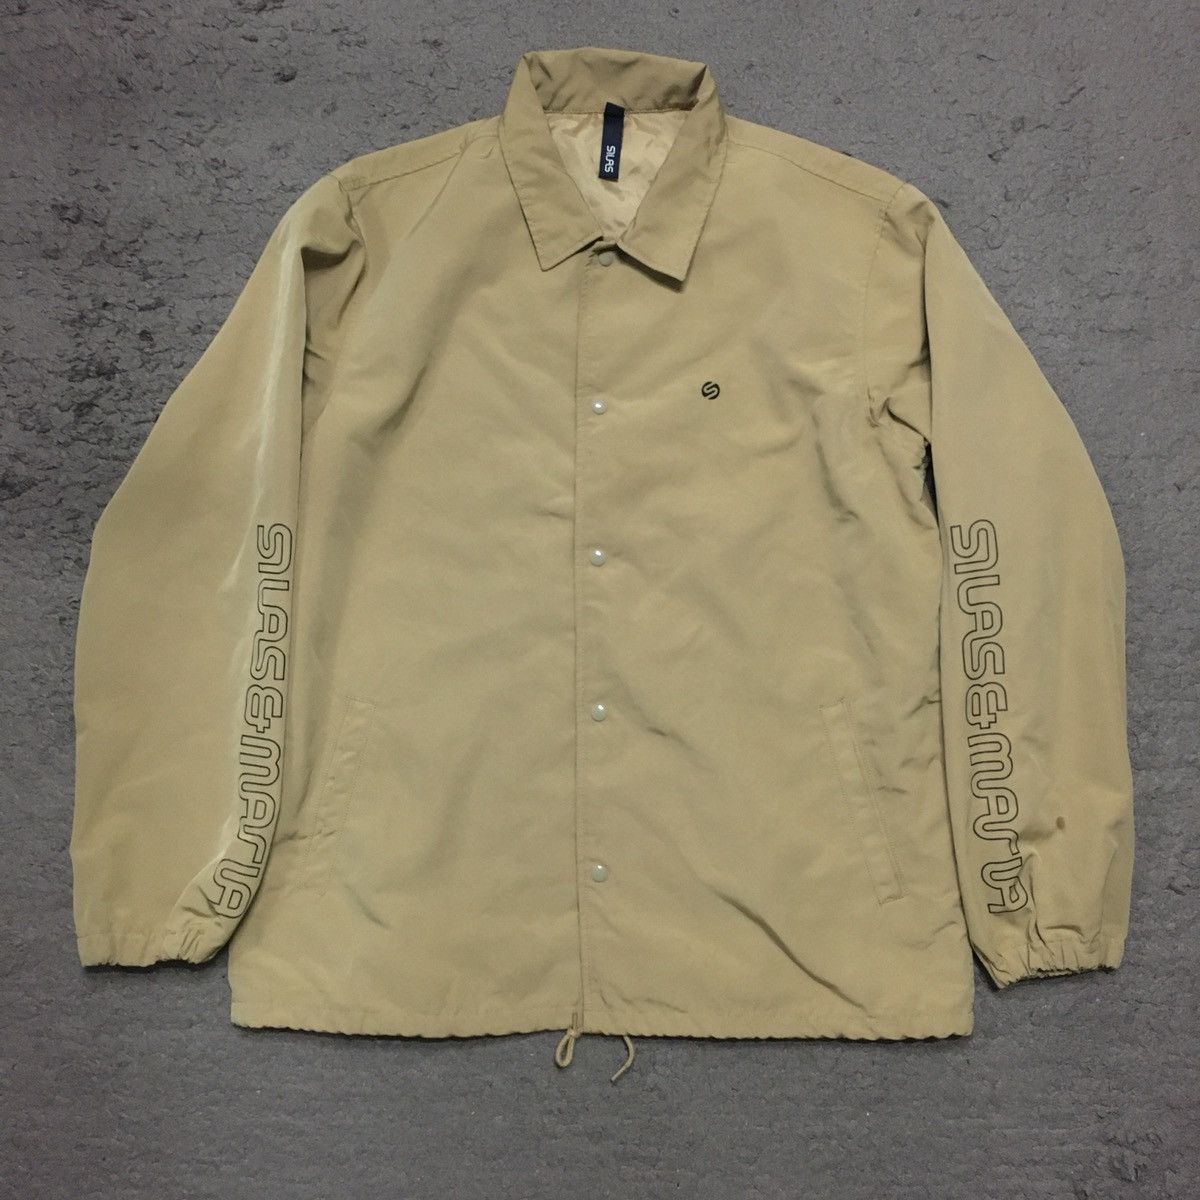 Vintage Silas Spellout Brown Coach Jacket | Grailed